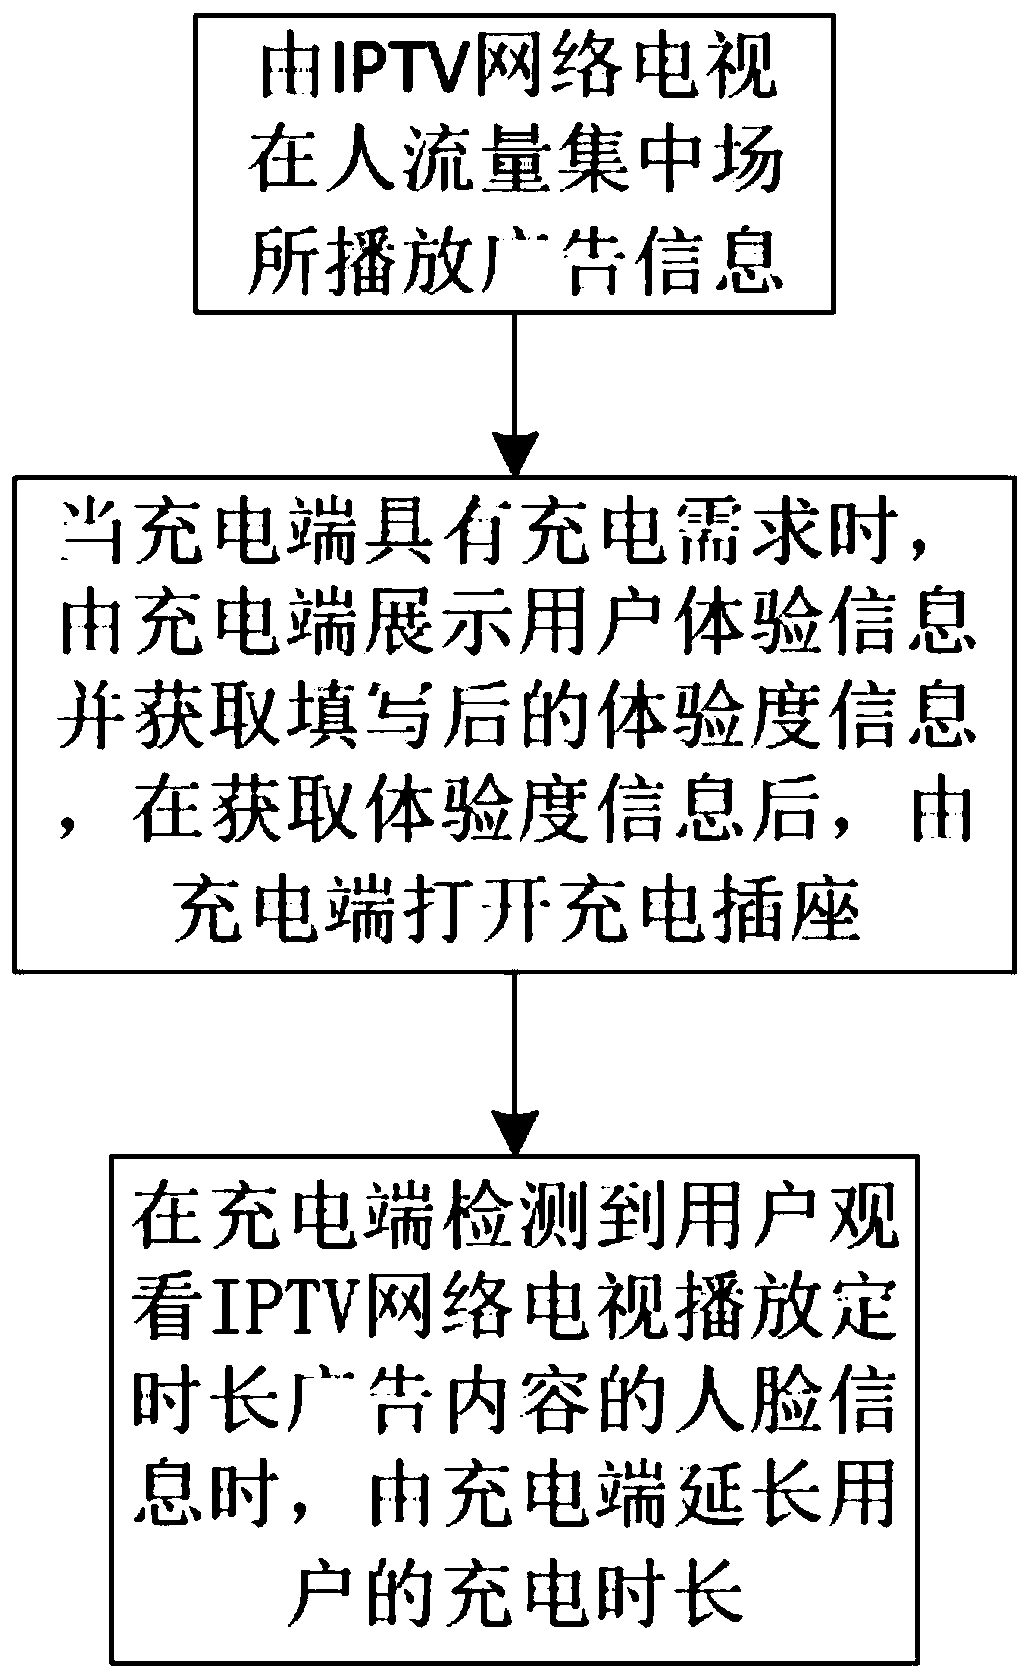 User experience collection system and method for IPTV